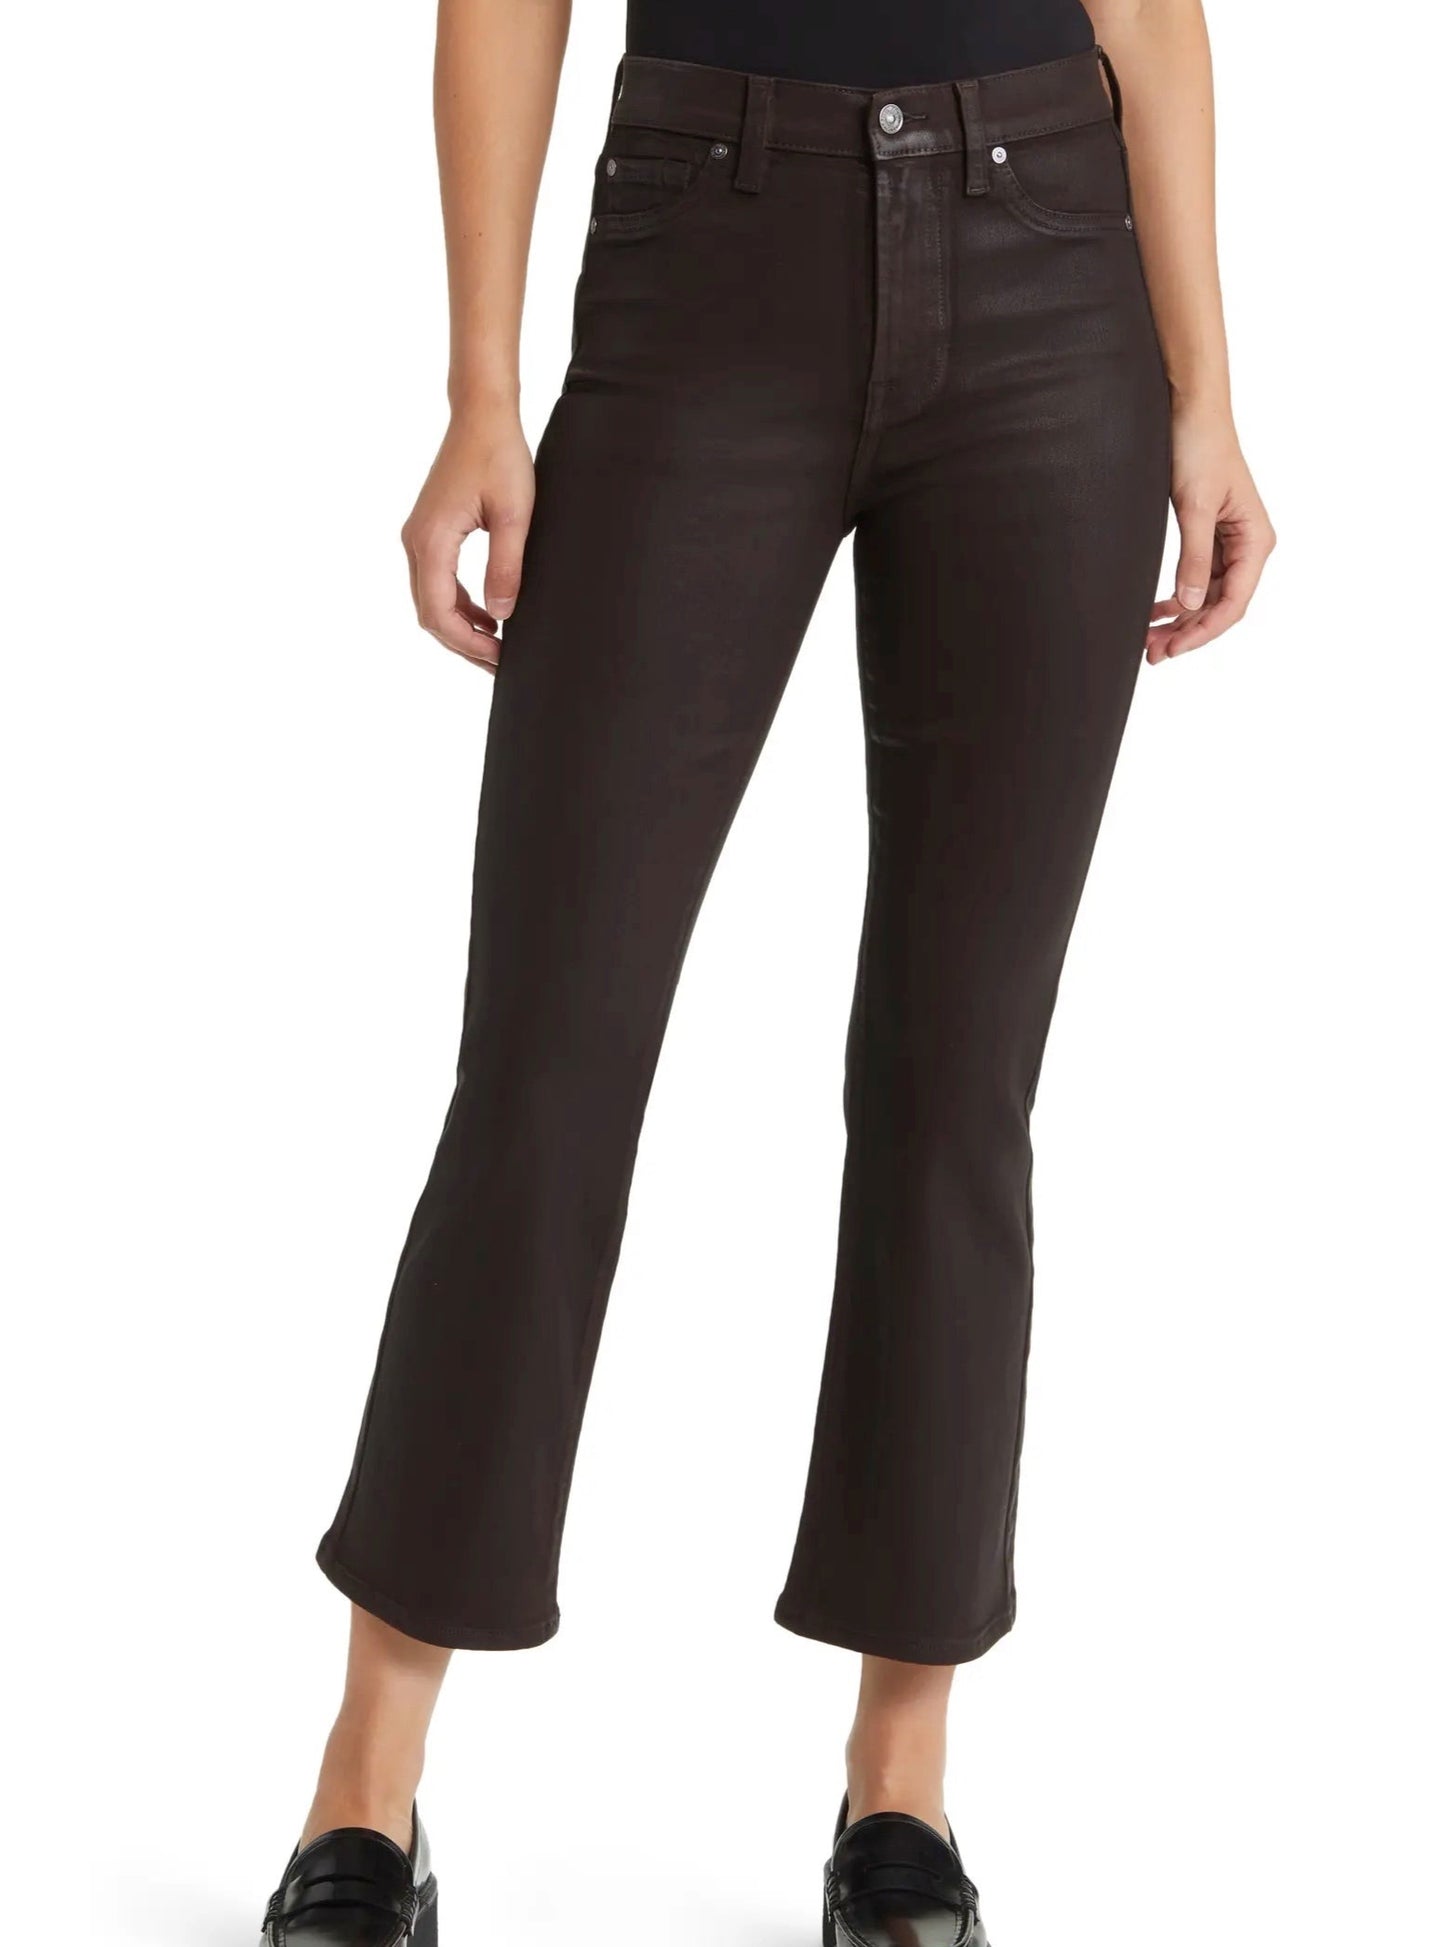 7FAM High Waisted Slim Kick Jeans in Coated Chocolate